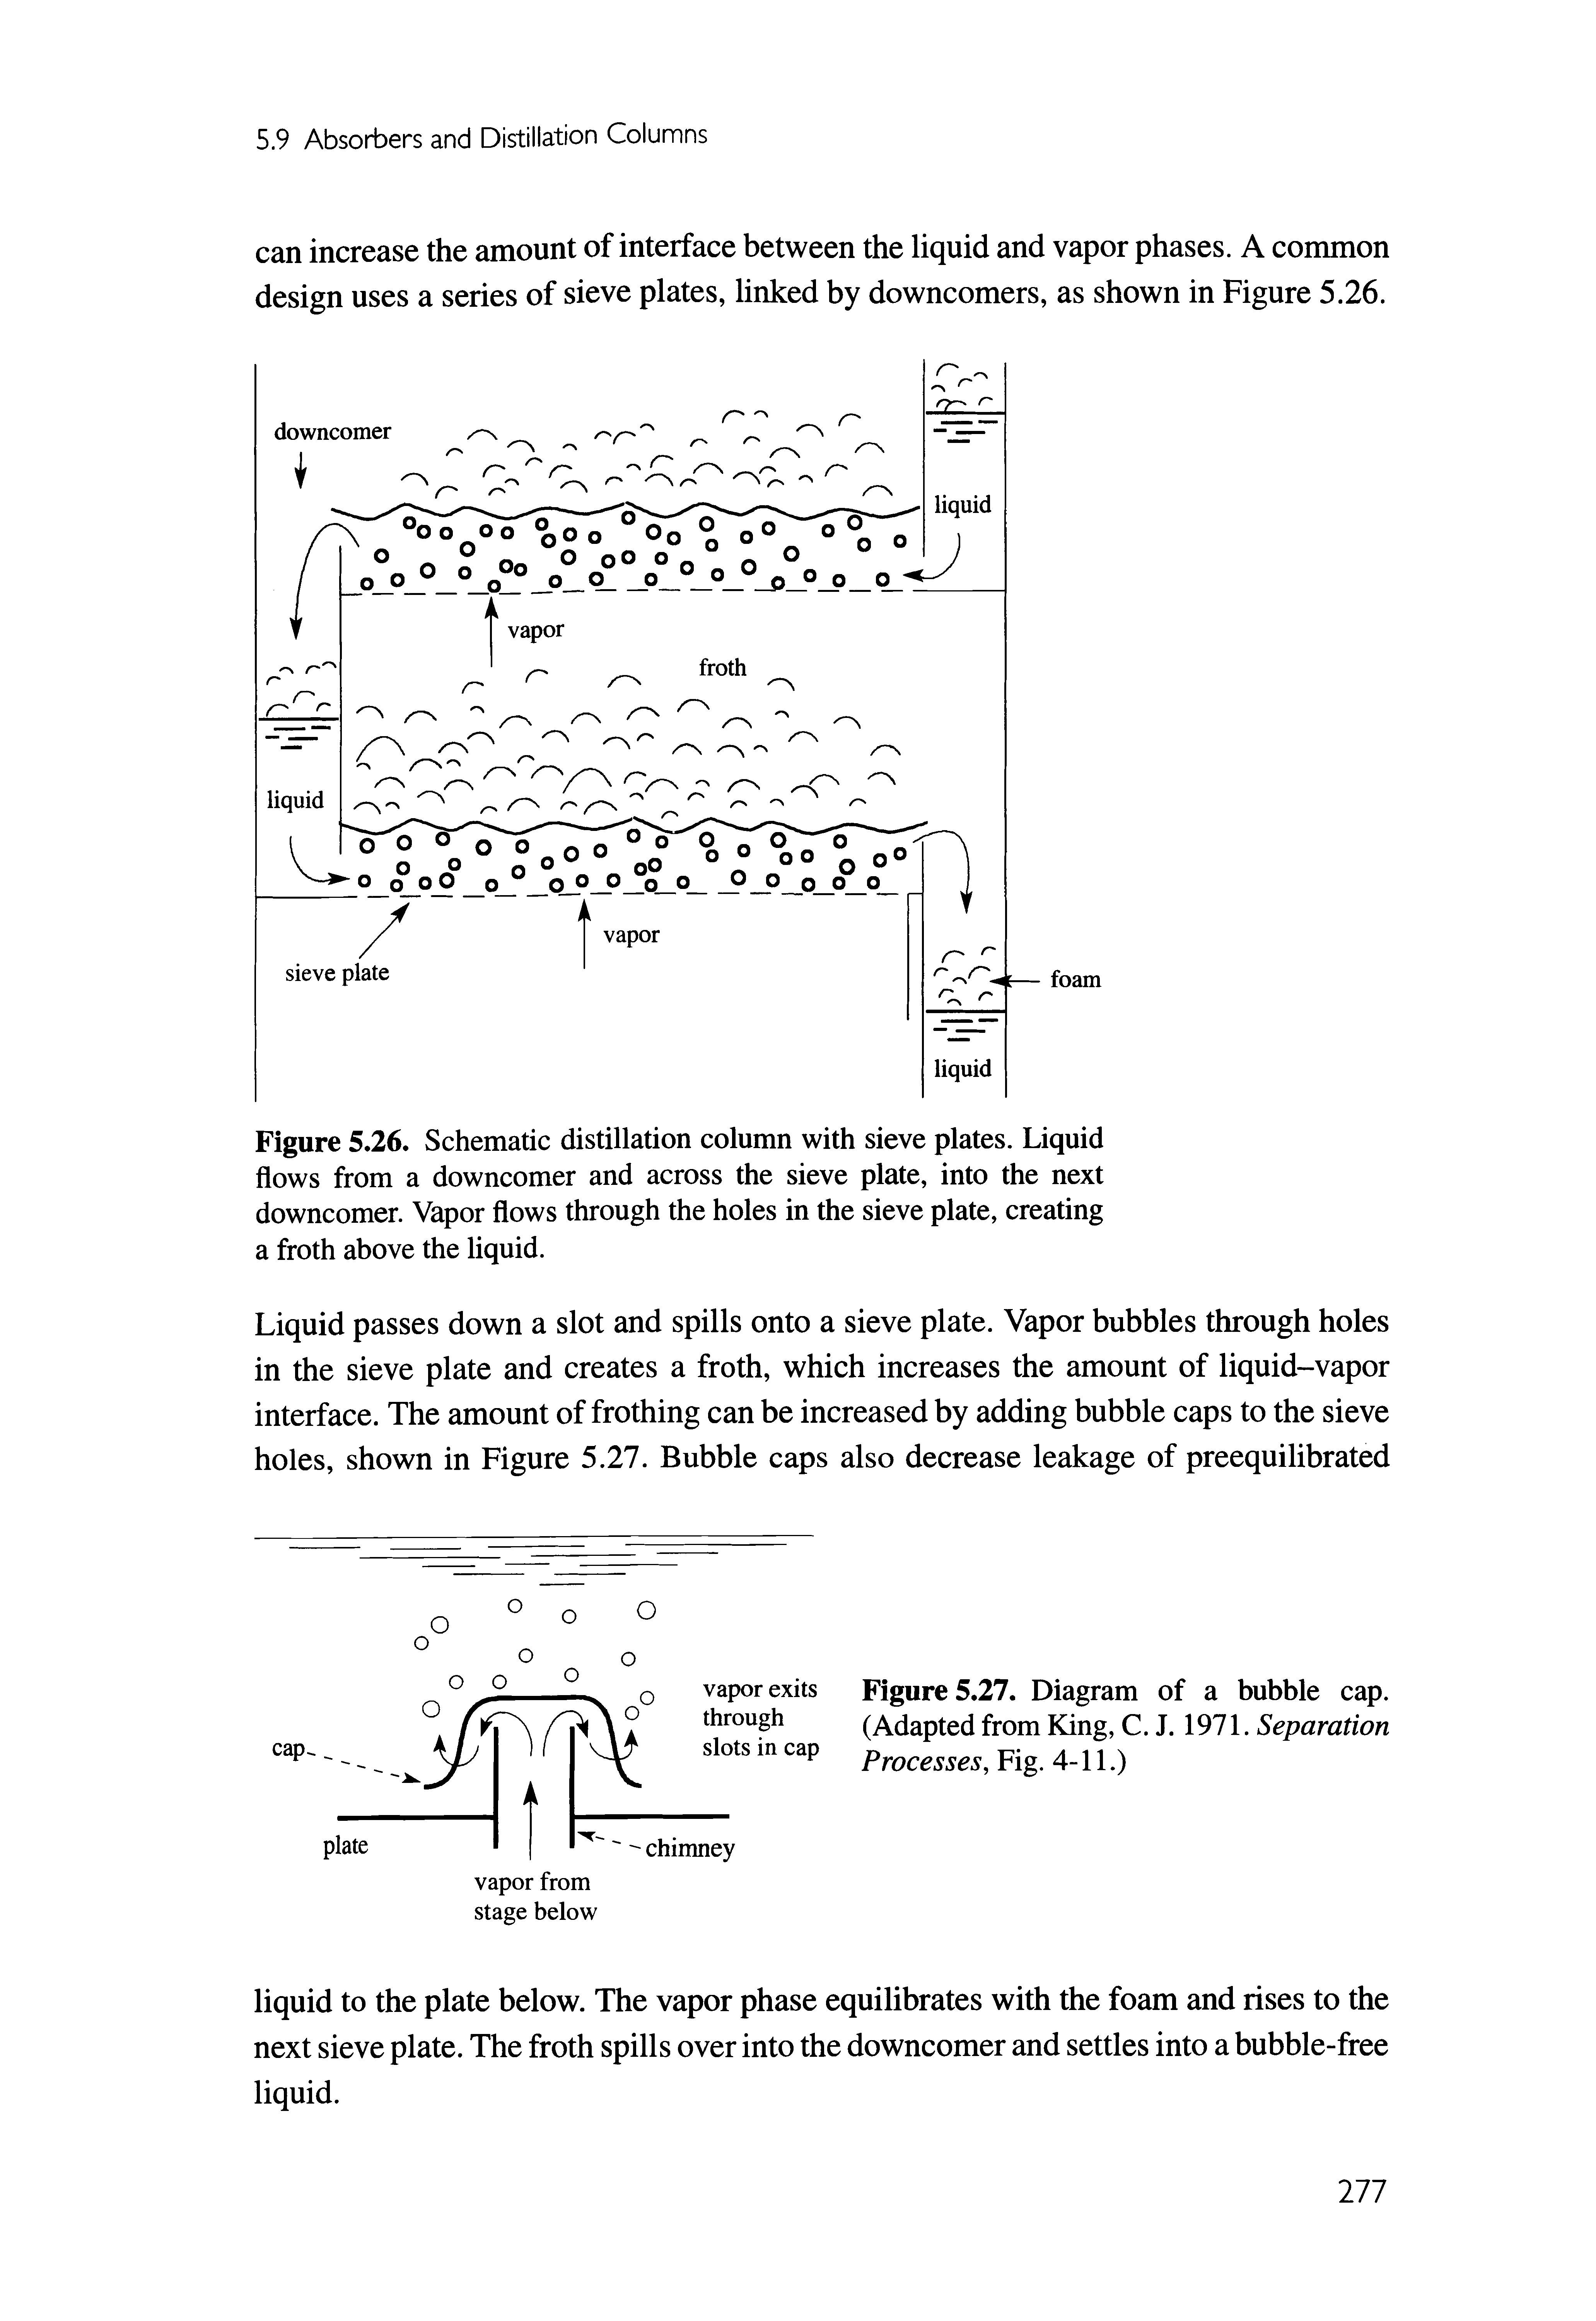 Figure 5.26. Schematic distillation column with sieve plates. Liquid flows from a downcomer and across the sieve plate, into the next downcomer. Vapor flows through the holes in the sieve plate, creating a froth above the liquid.